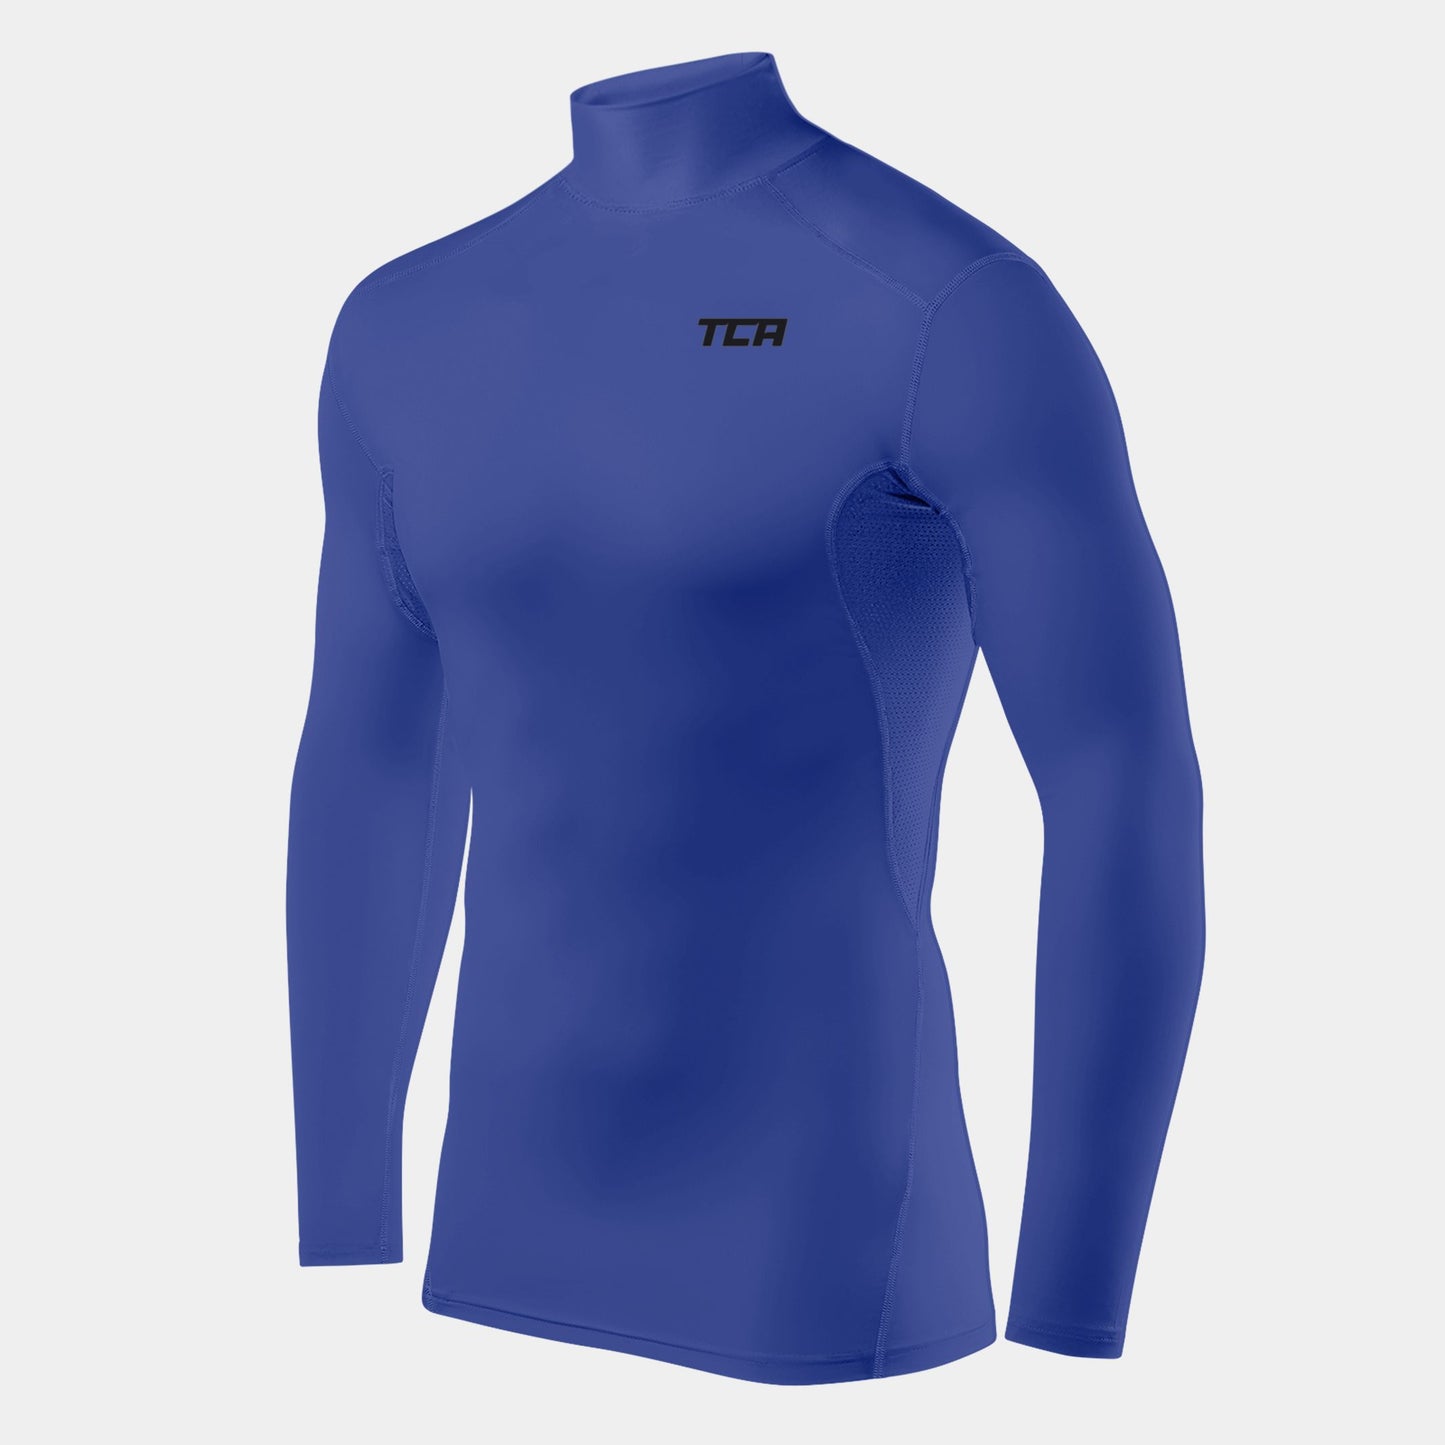 Hyperfusion Compression Base Layer Long Sleeve Mock Neck For Men